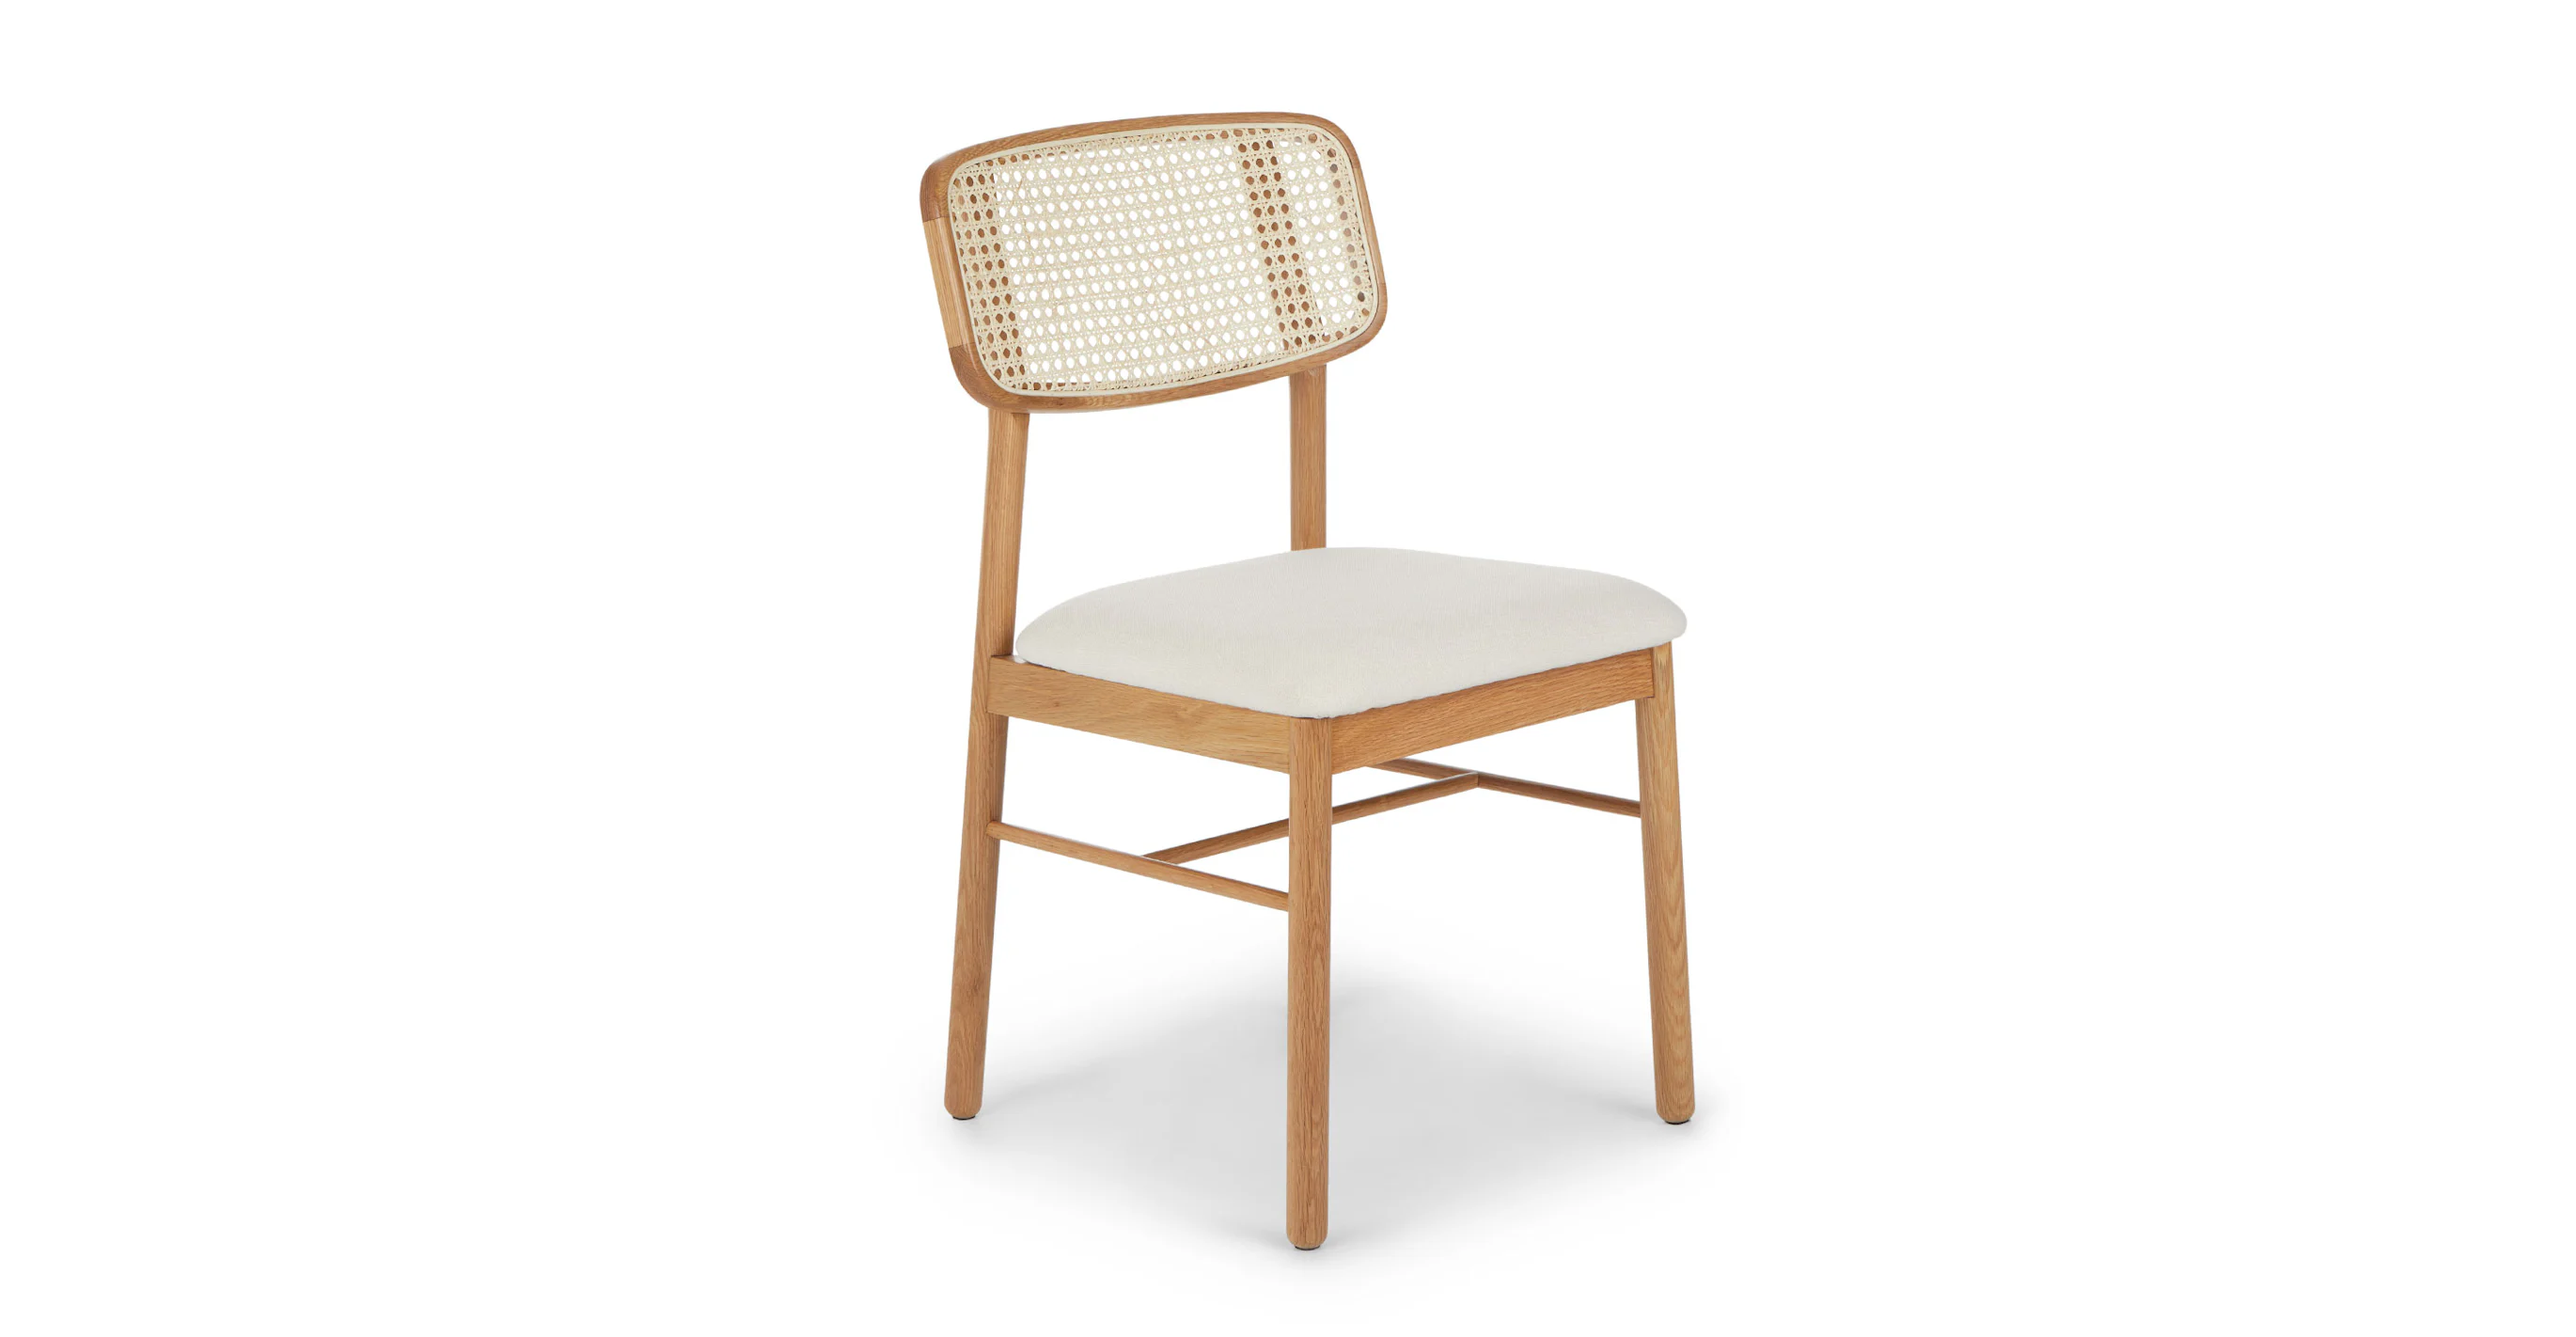 Shop Netro dining chair, vintage white and oak from Article on Openhaus